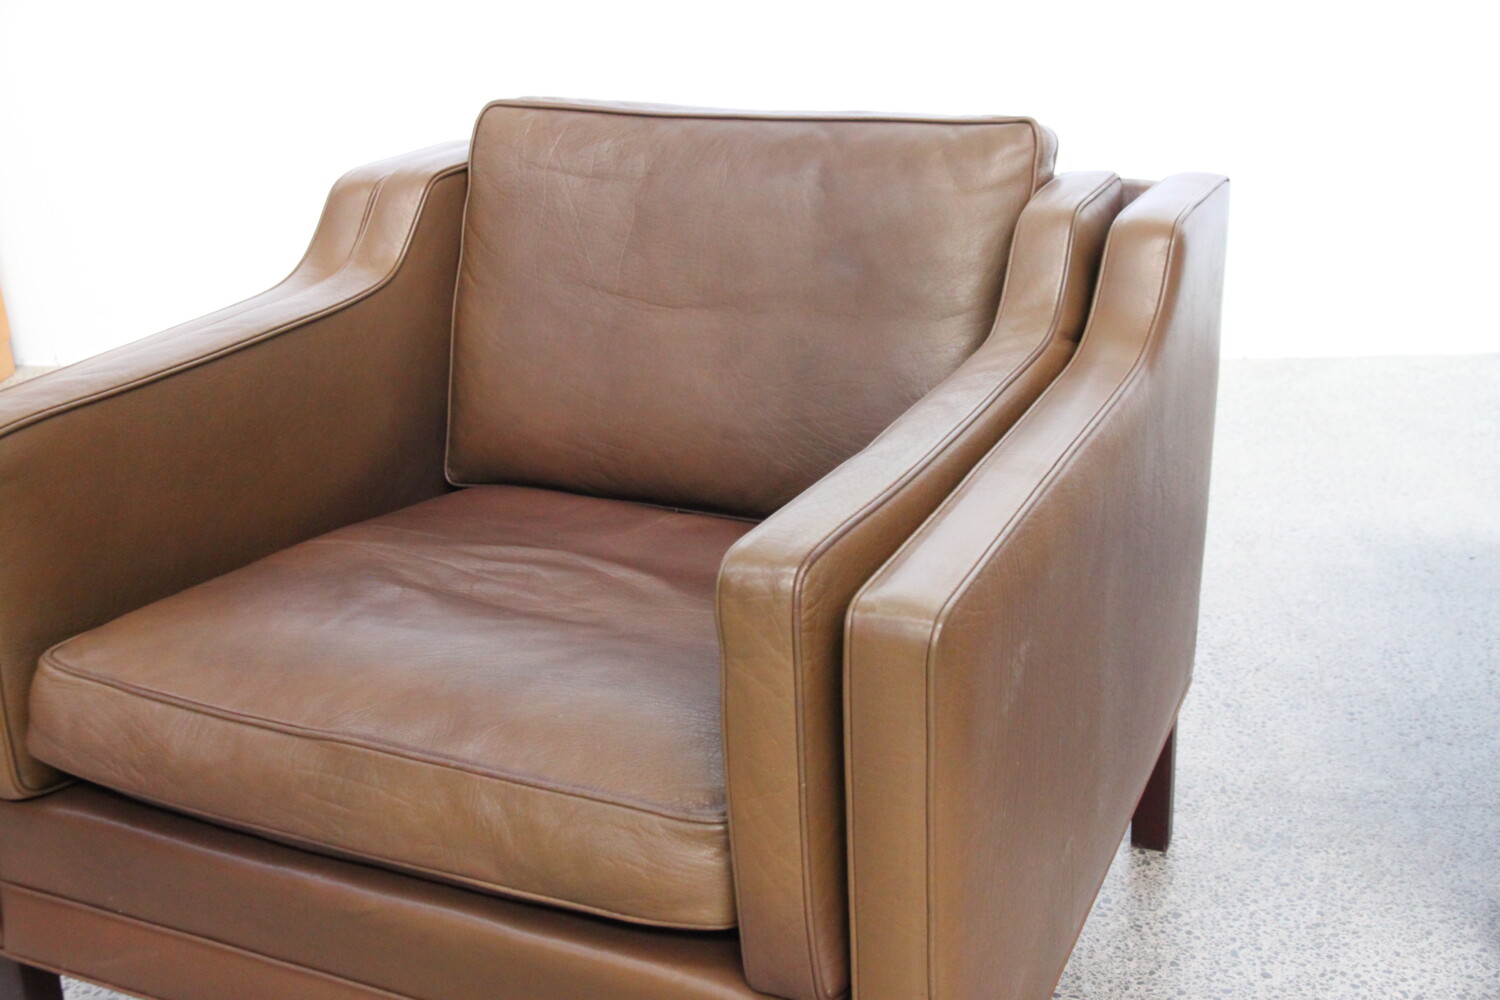 Pair of Leather Armchairs sold